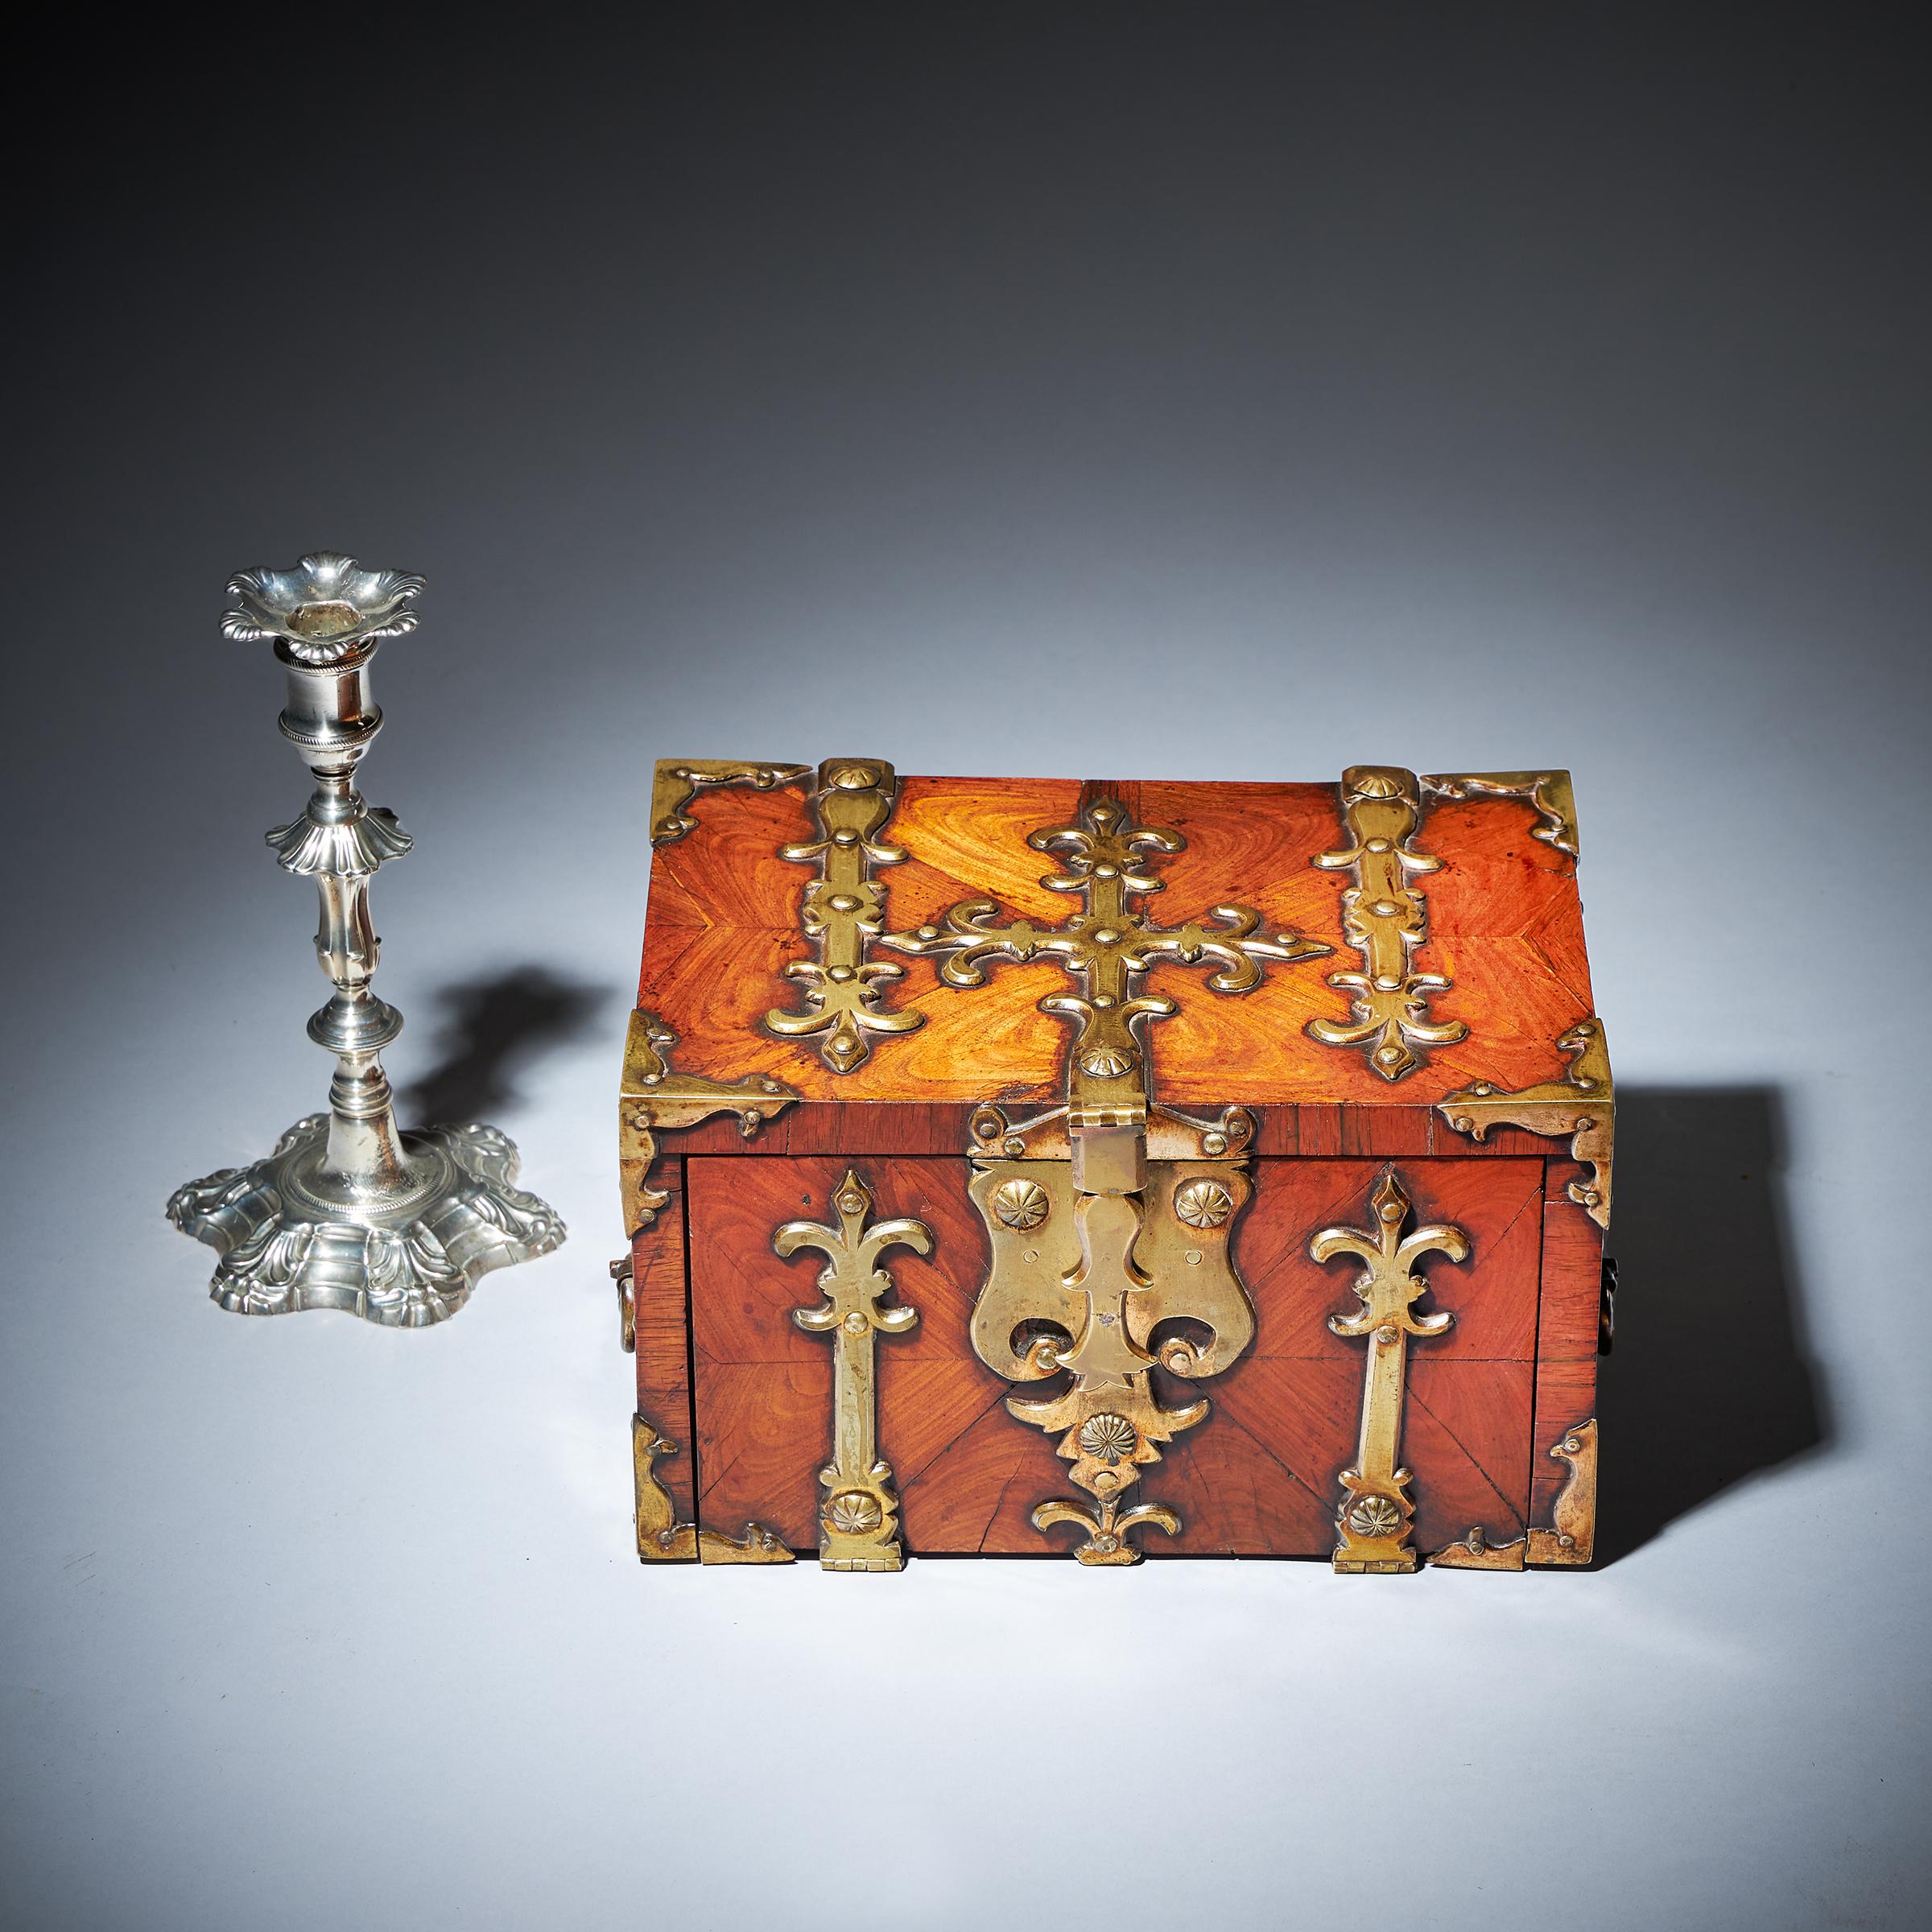 A William and Mary Kingwood / Princes Oyster Strongbox or Coffre Fort of Diminutive Proportions, Circa 1680-1700, England. 

Adorned with highly decorative gilt brass strapwork and decorated entirely in knife cut oysters of kingwood, this box is fit